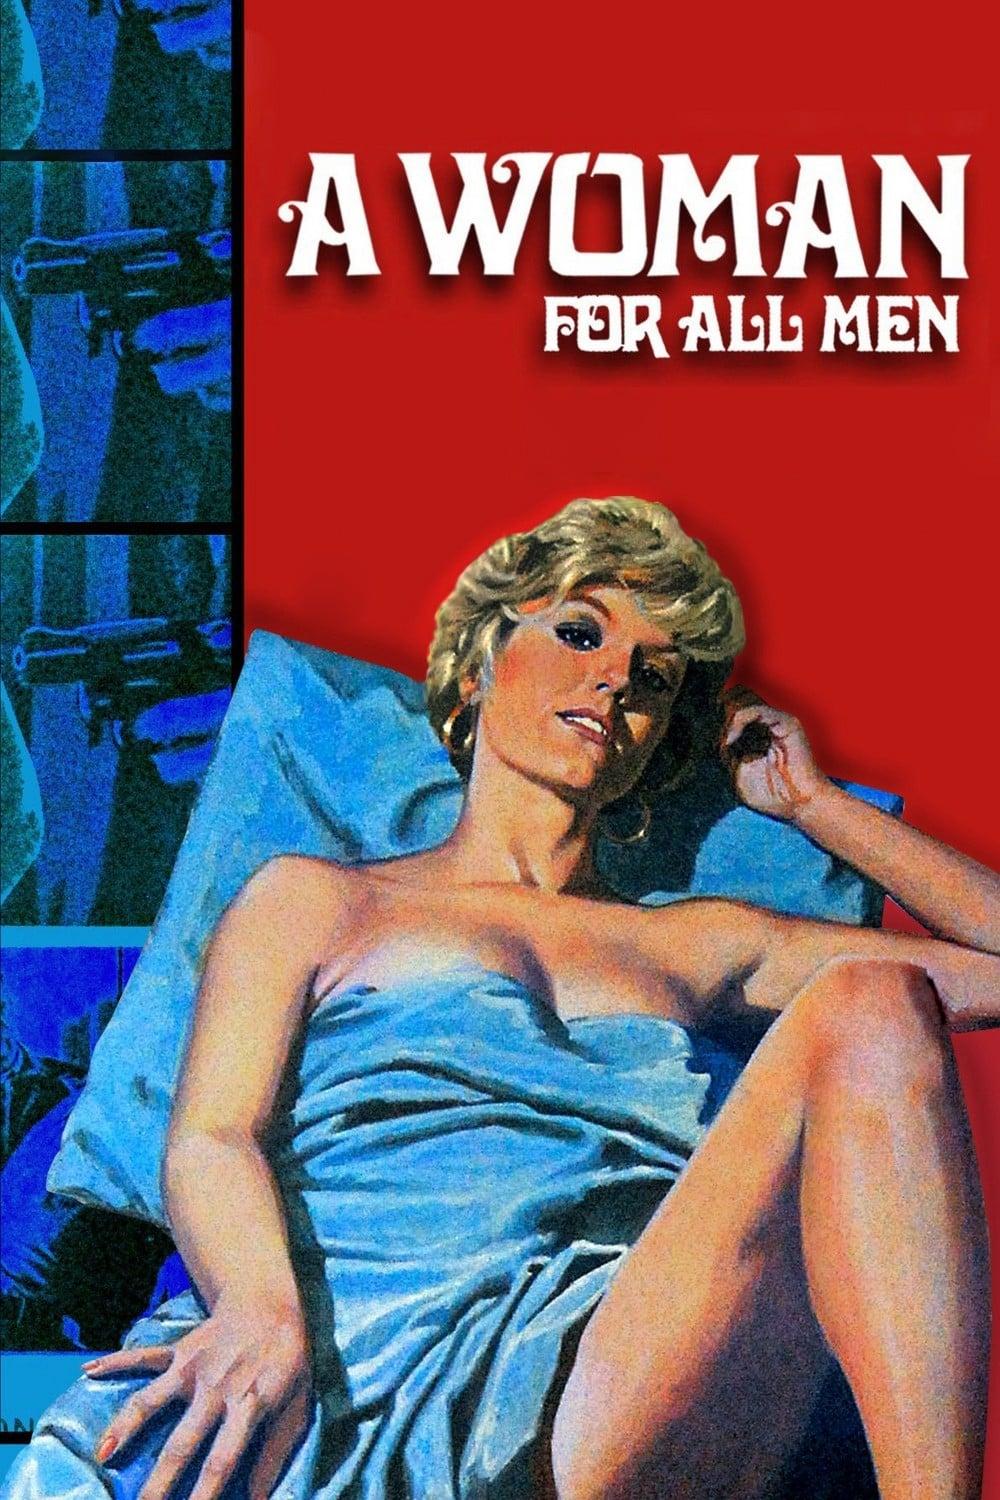 A Woman for All Men poster